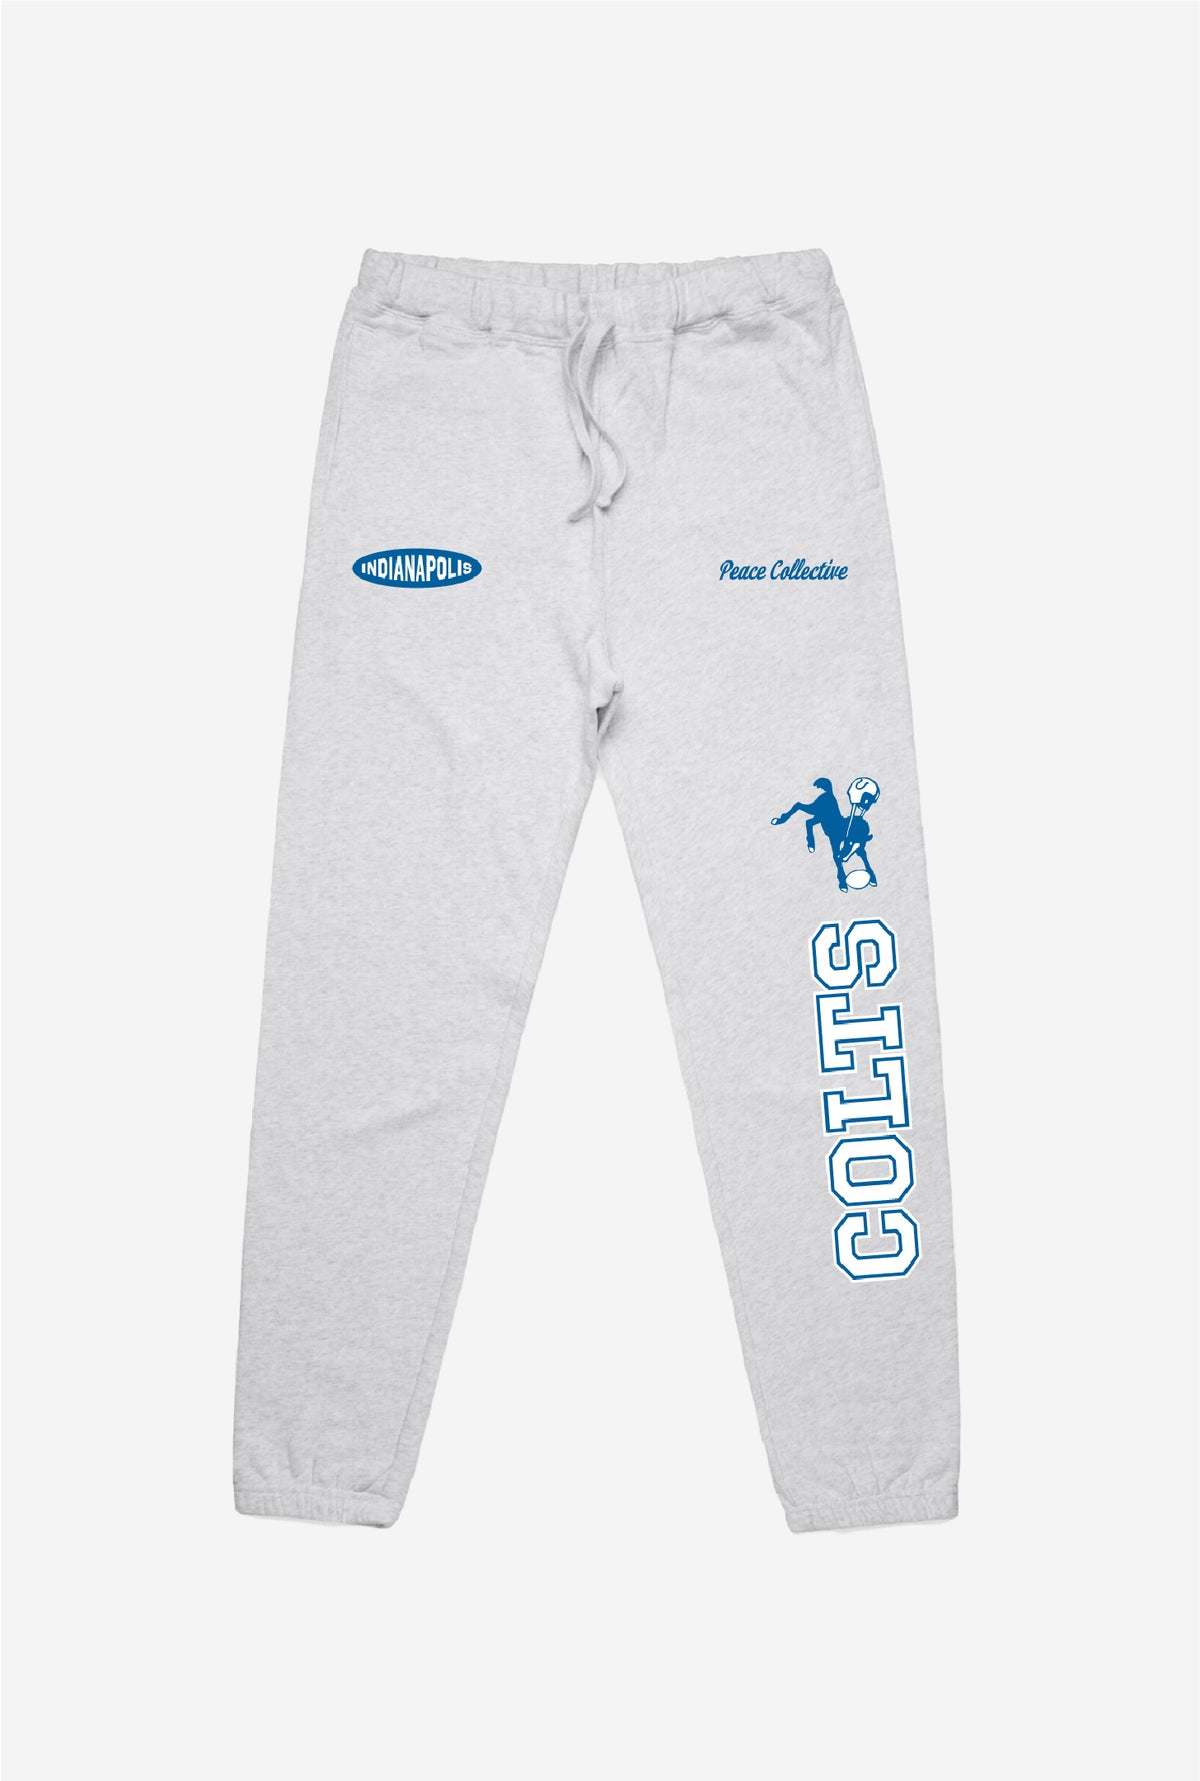 Indianapolis Colts Washed Graphic Joggers - Ash